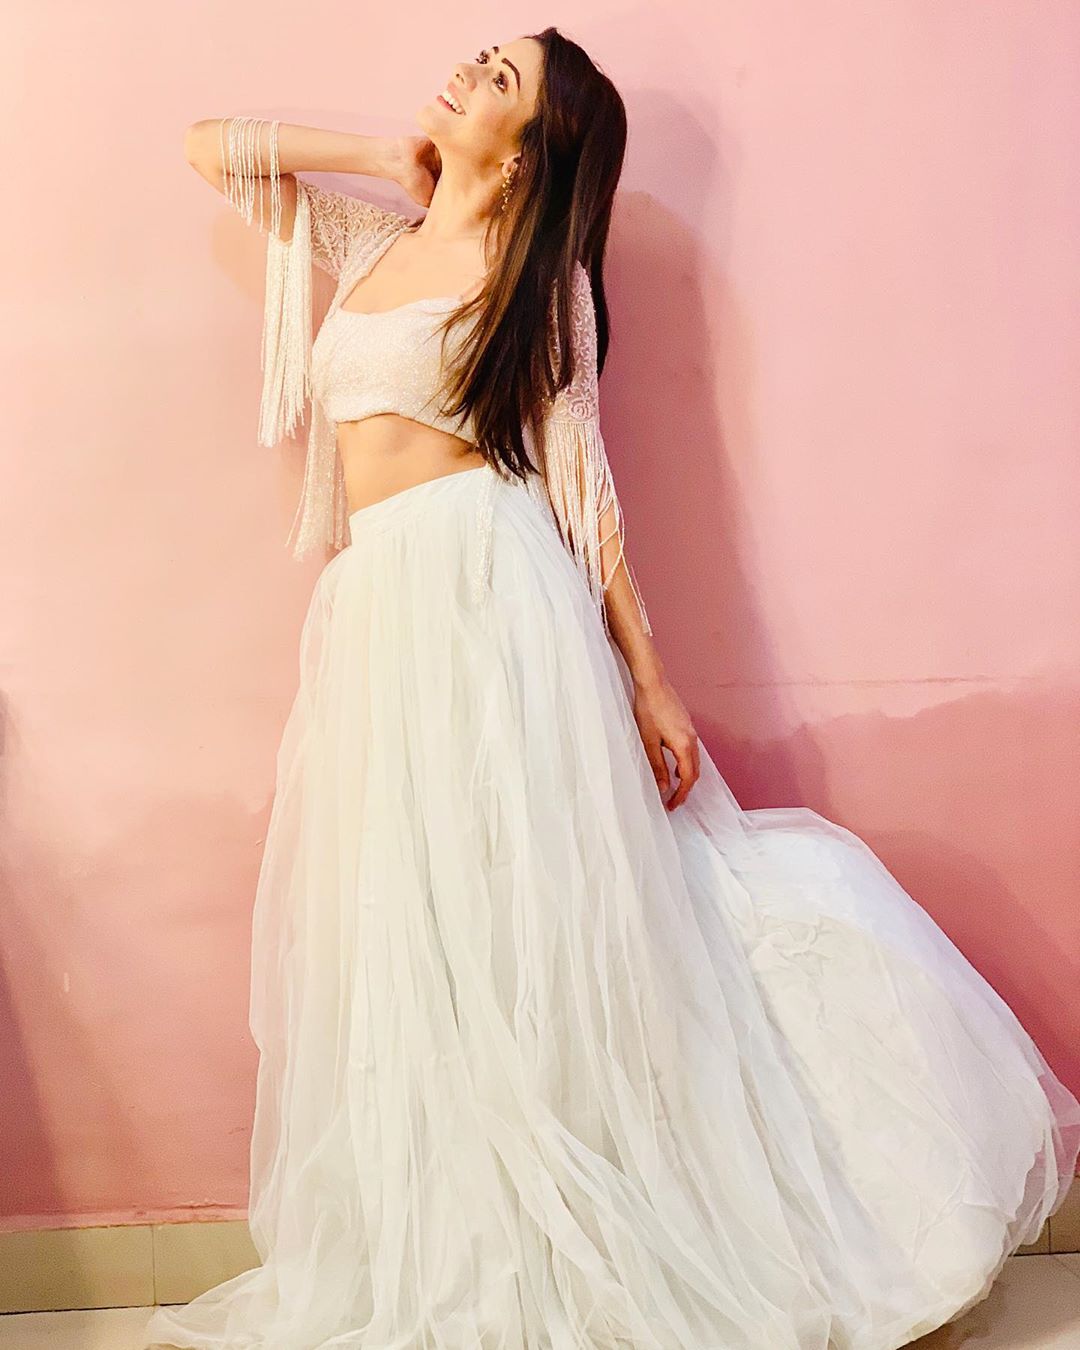 Hiba Nawab Oozing Sex Appeal In A Sexy White Dress